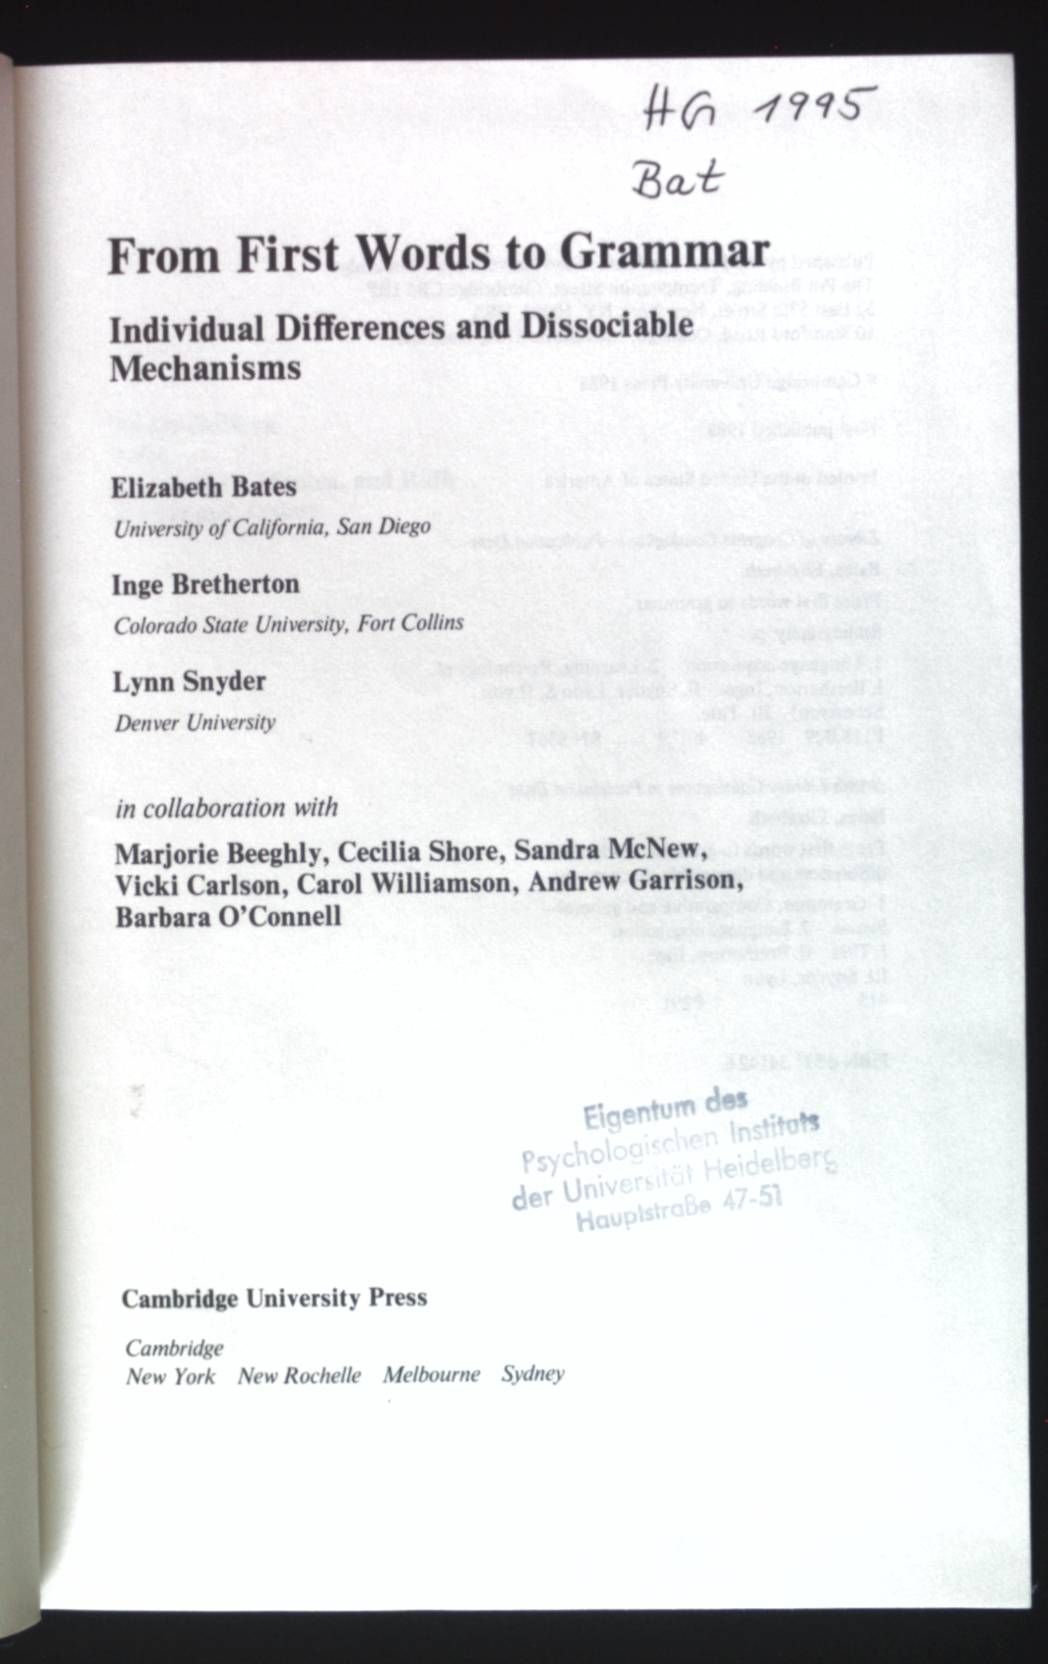 From First Words to Grammar: Individual Differences and Dissociable Mechanisms. - Bates, Elizabeth, Inge Bretherton and Lynn Snyder